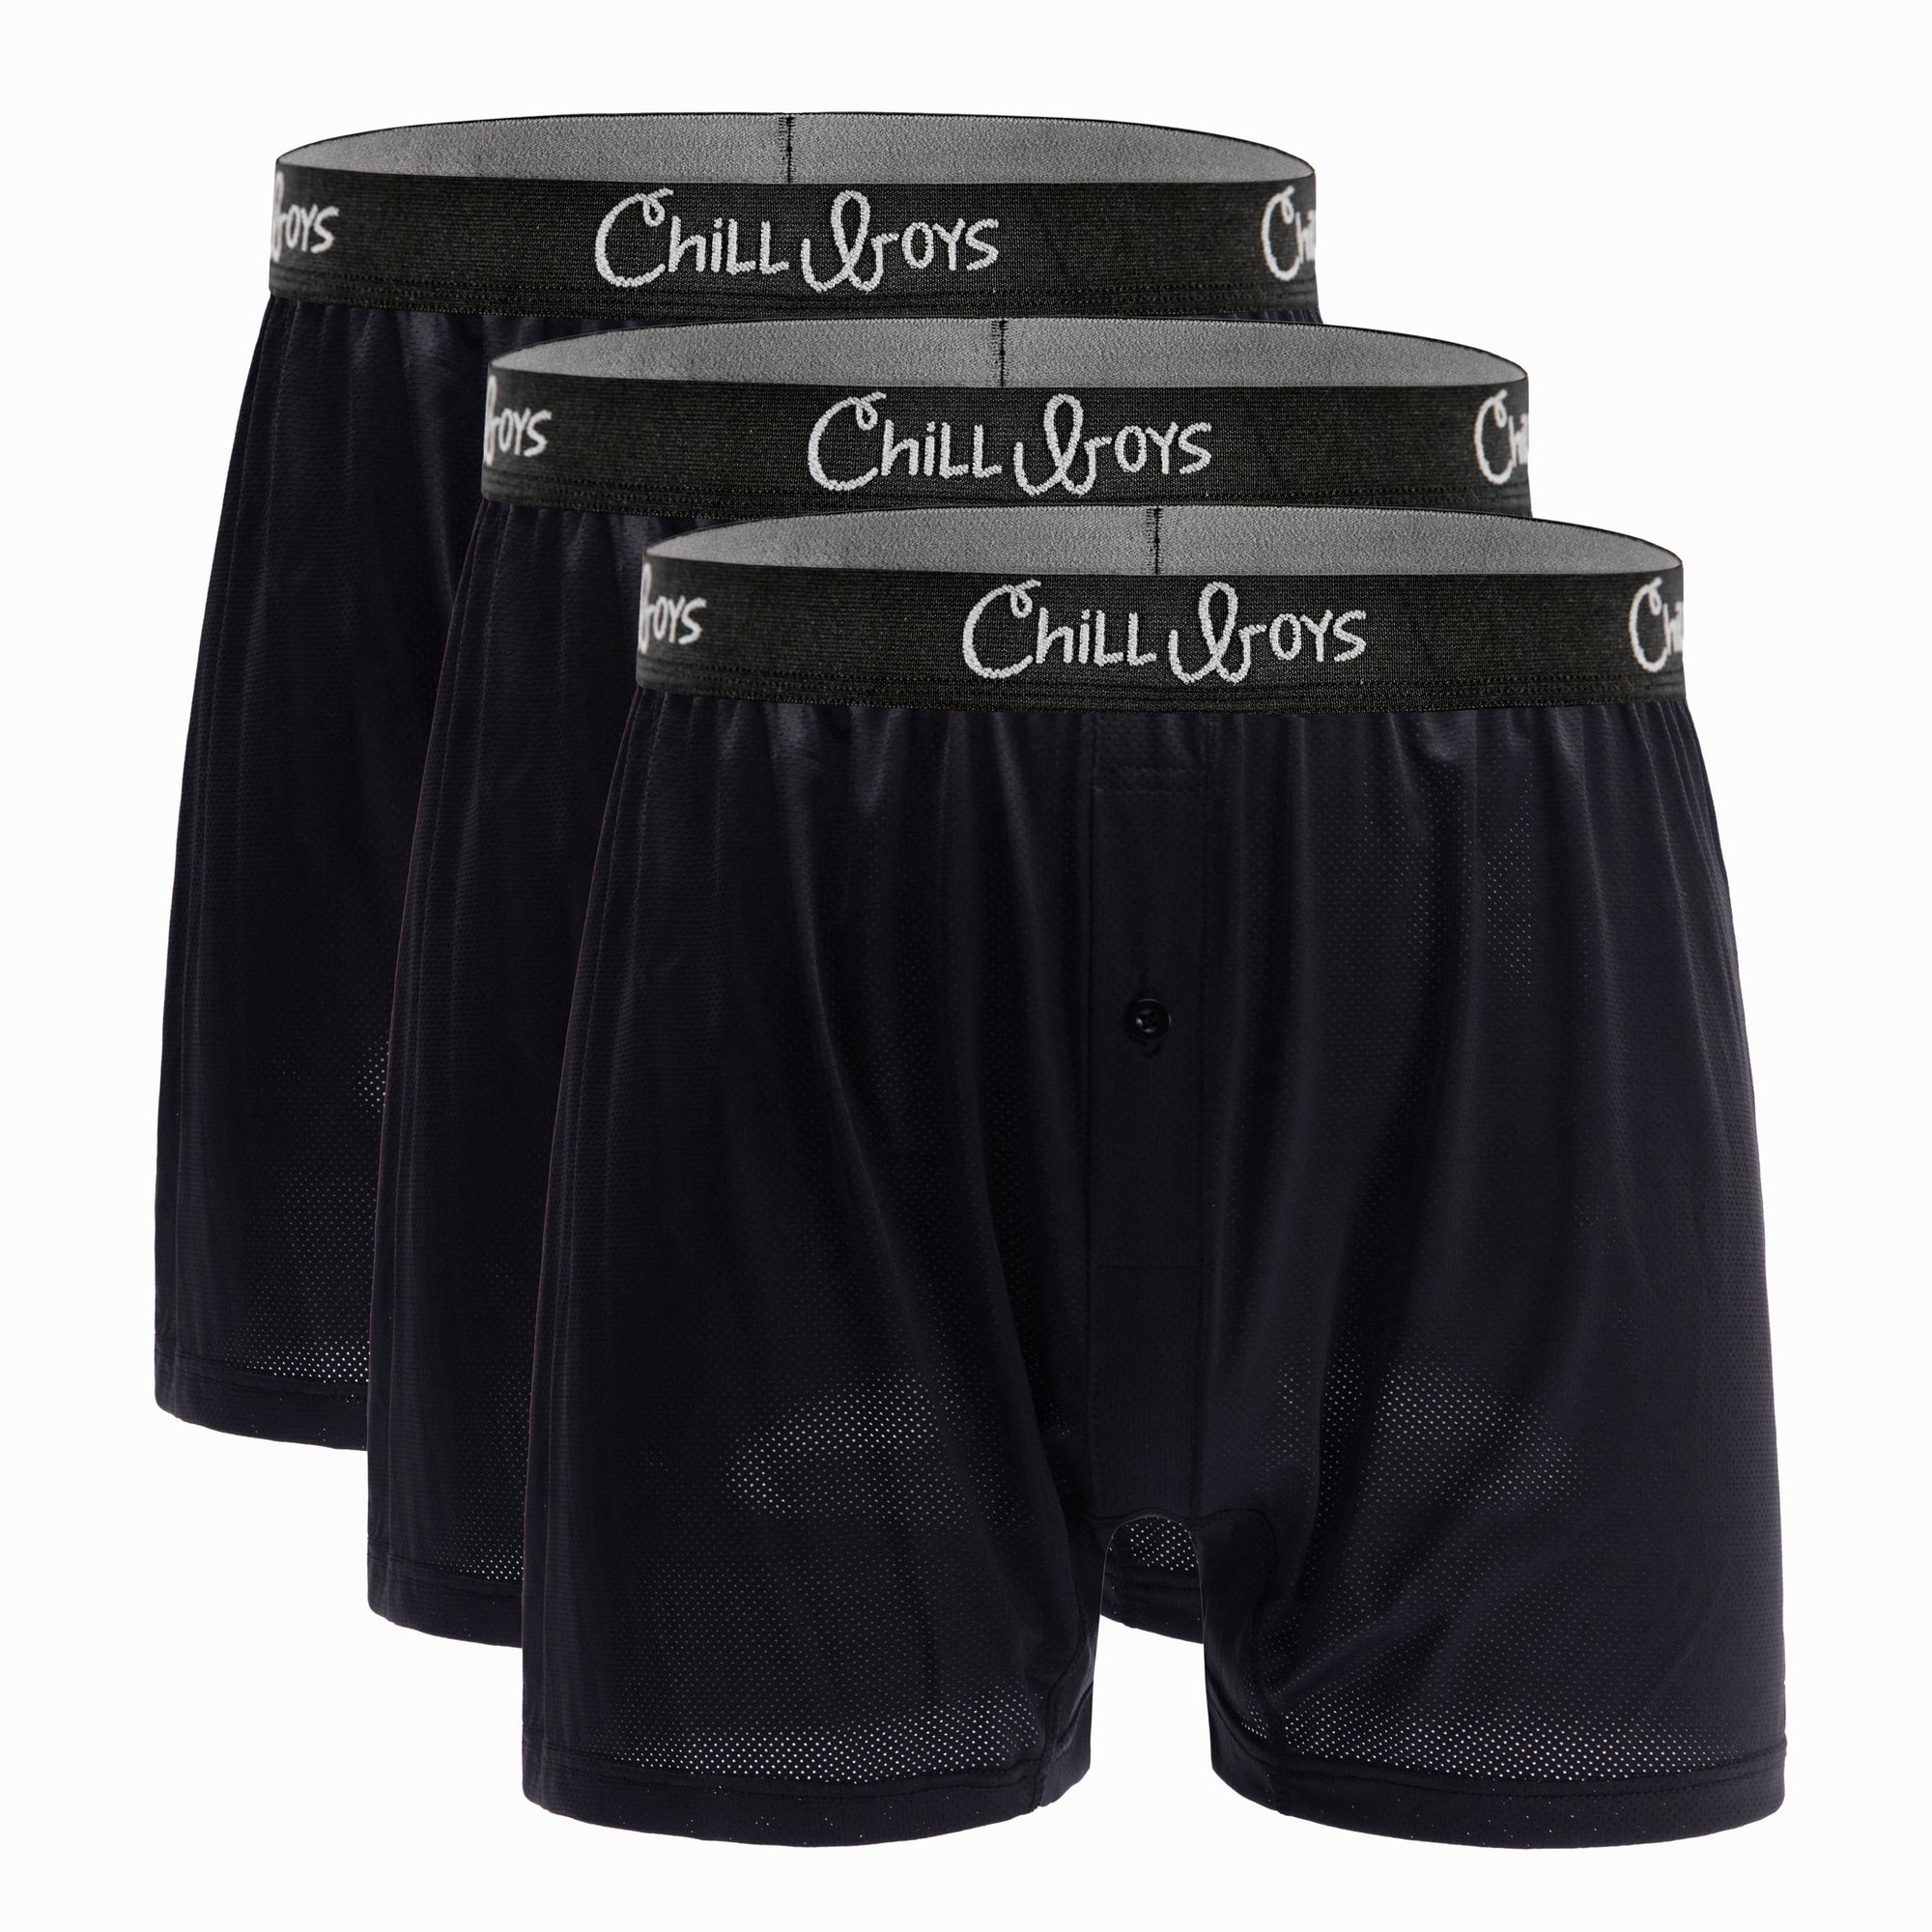 3-Pack Chill Boys Performance Boxers